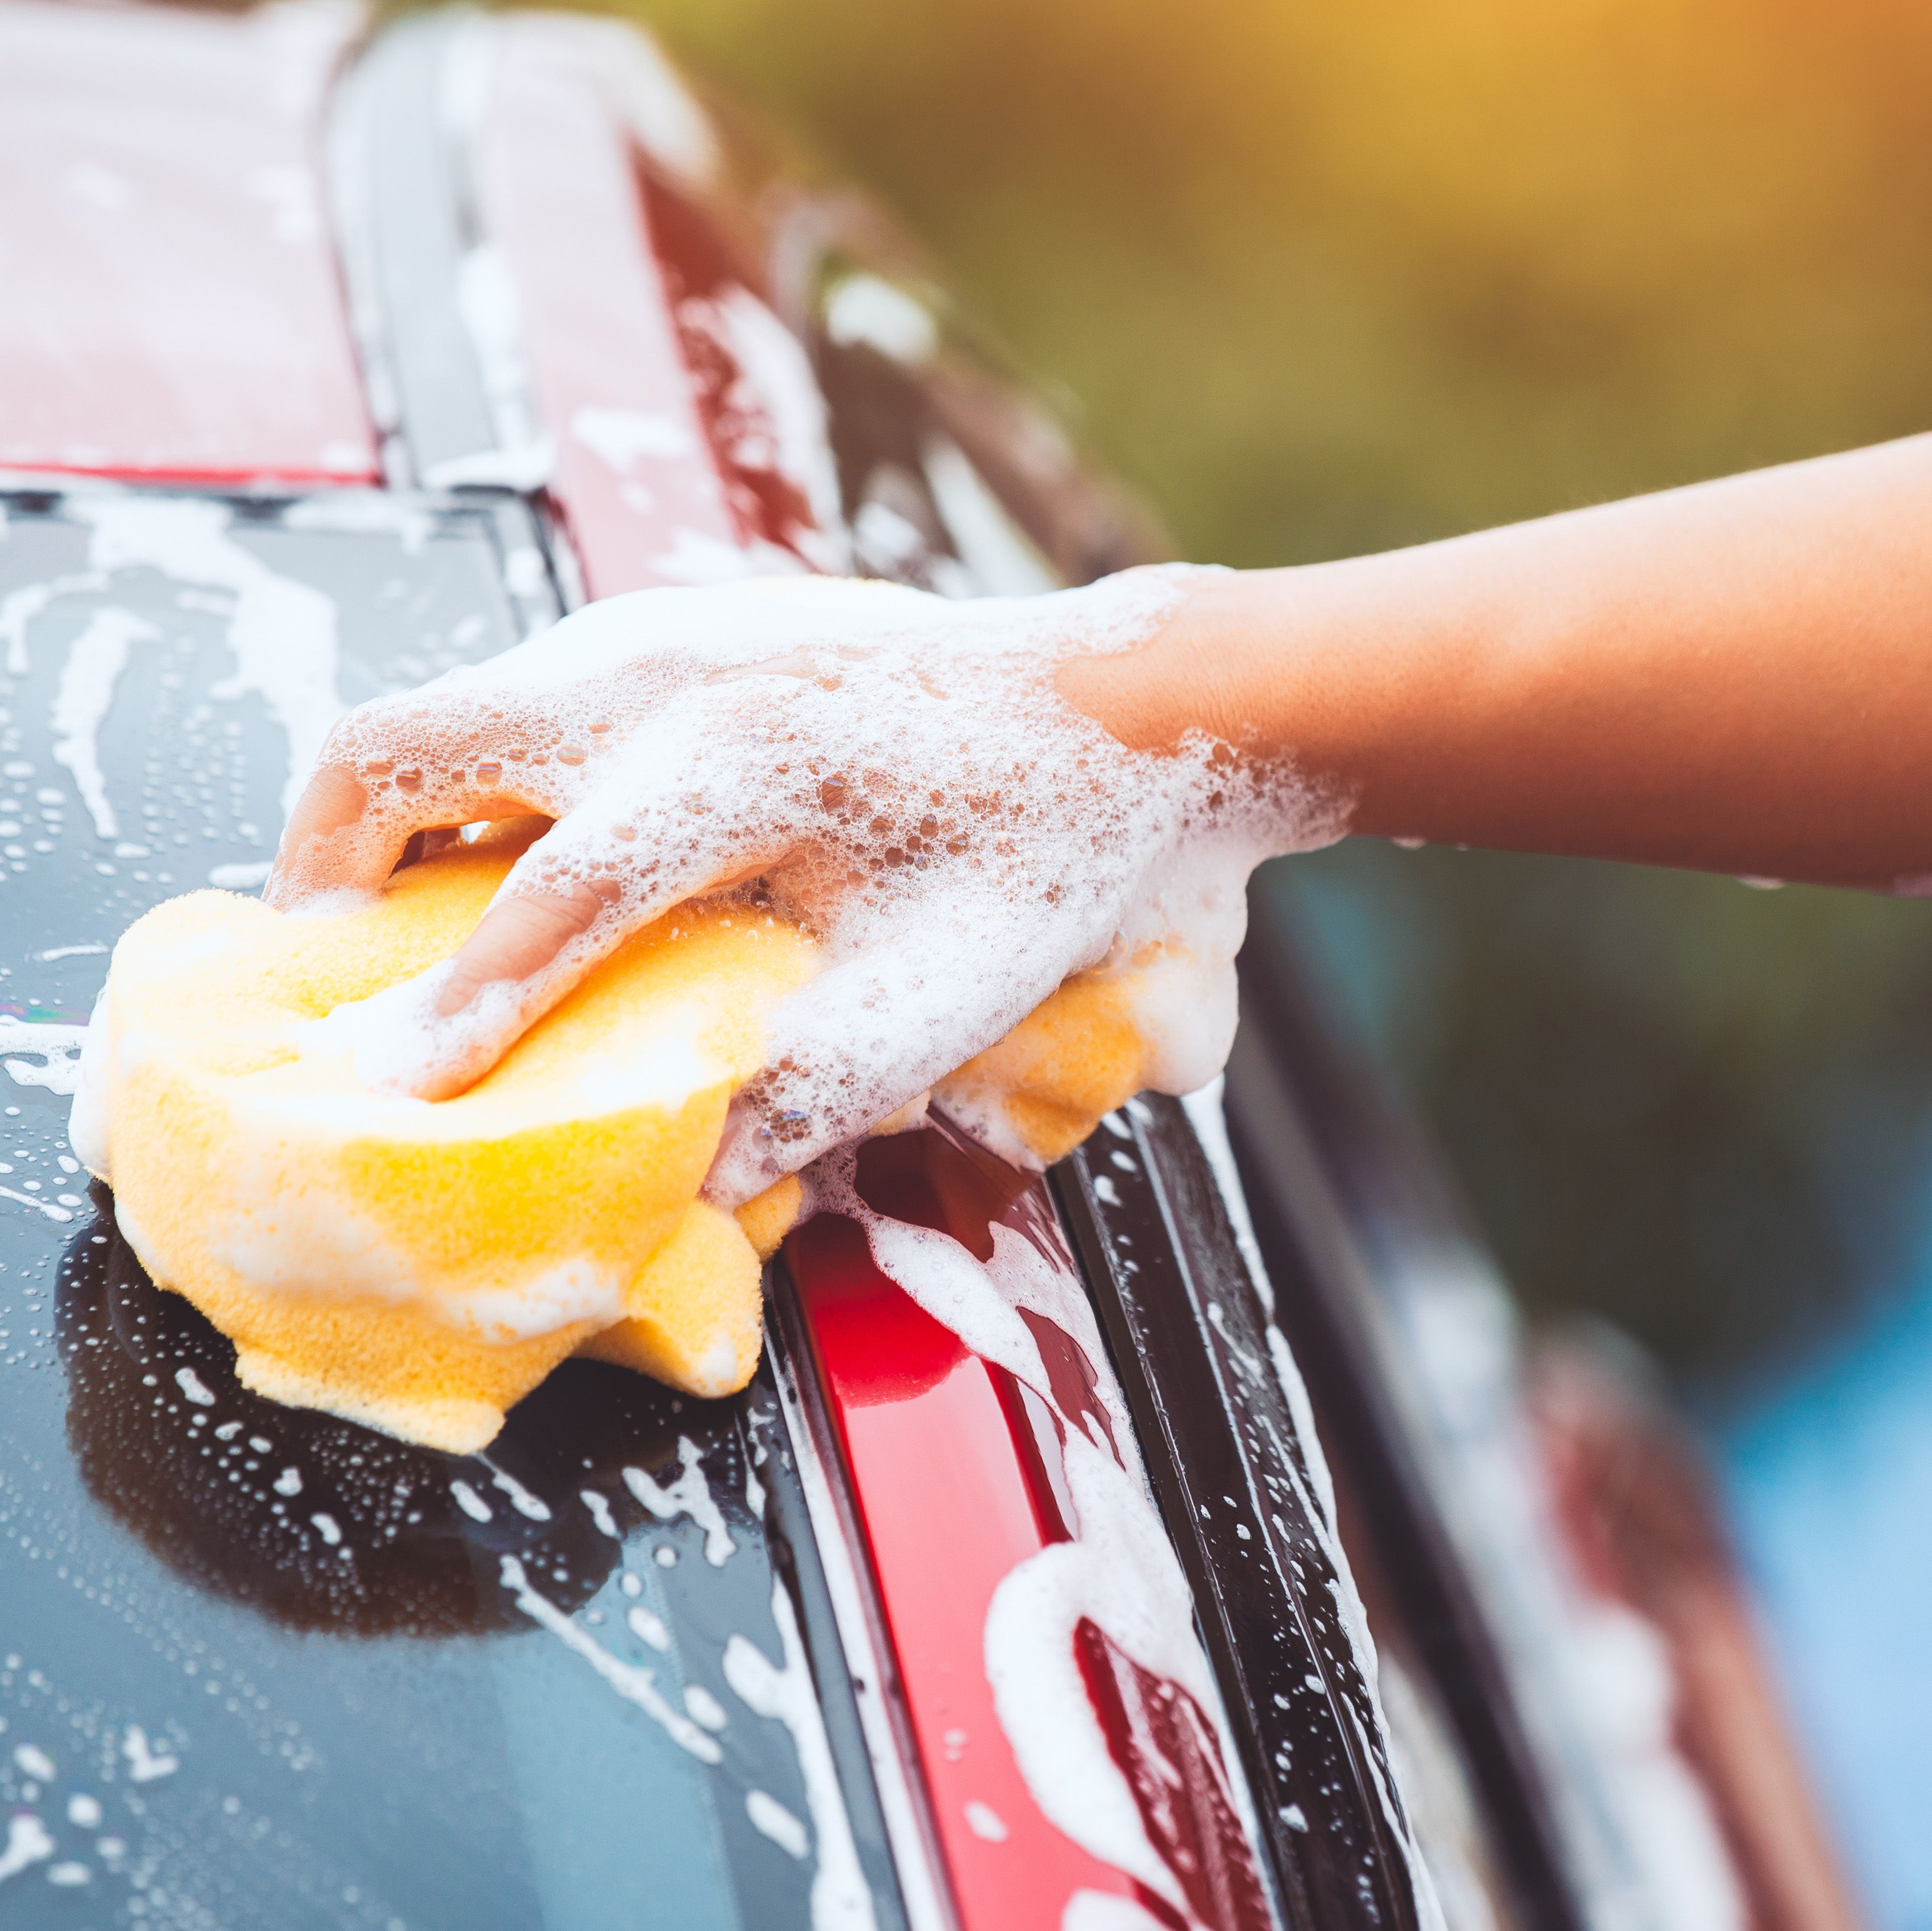 How to Get A Clean Car: Use The Best Car Wash Soap